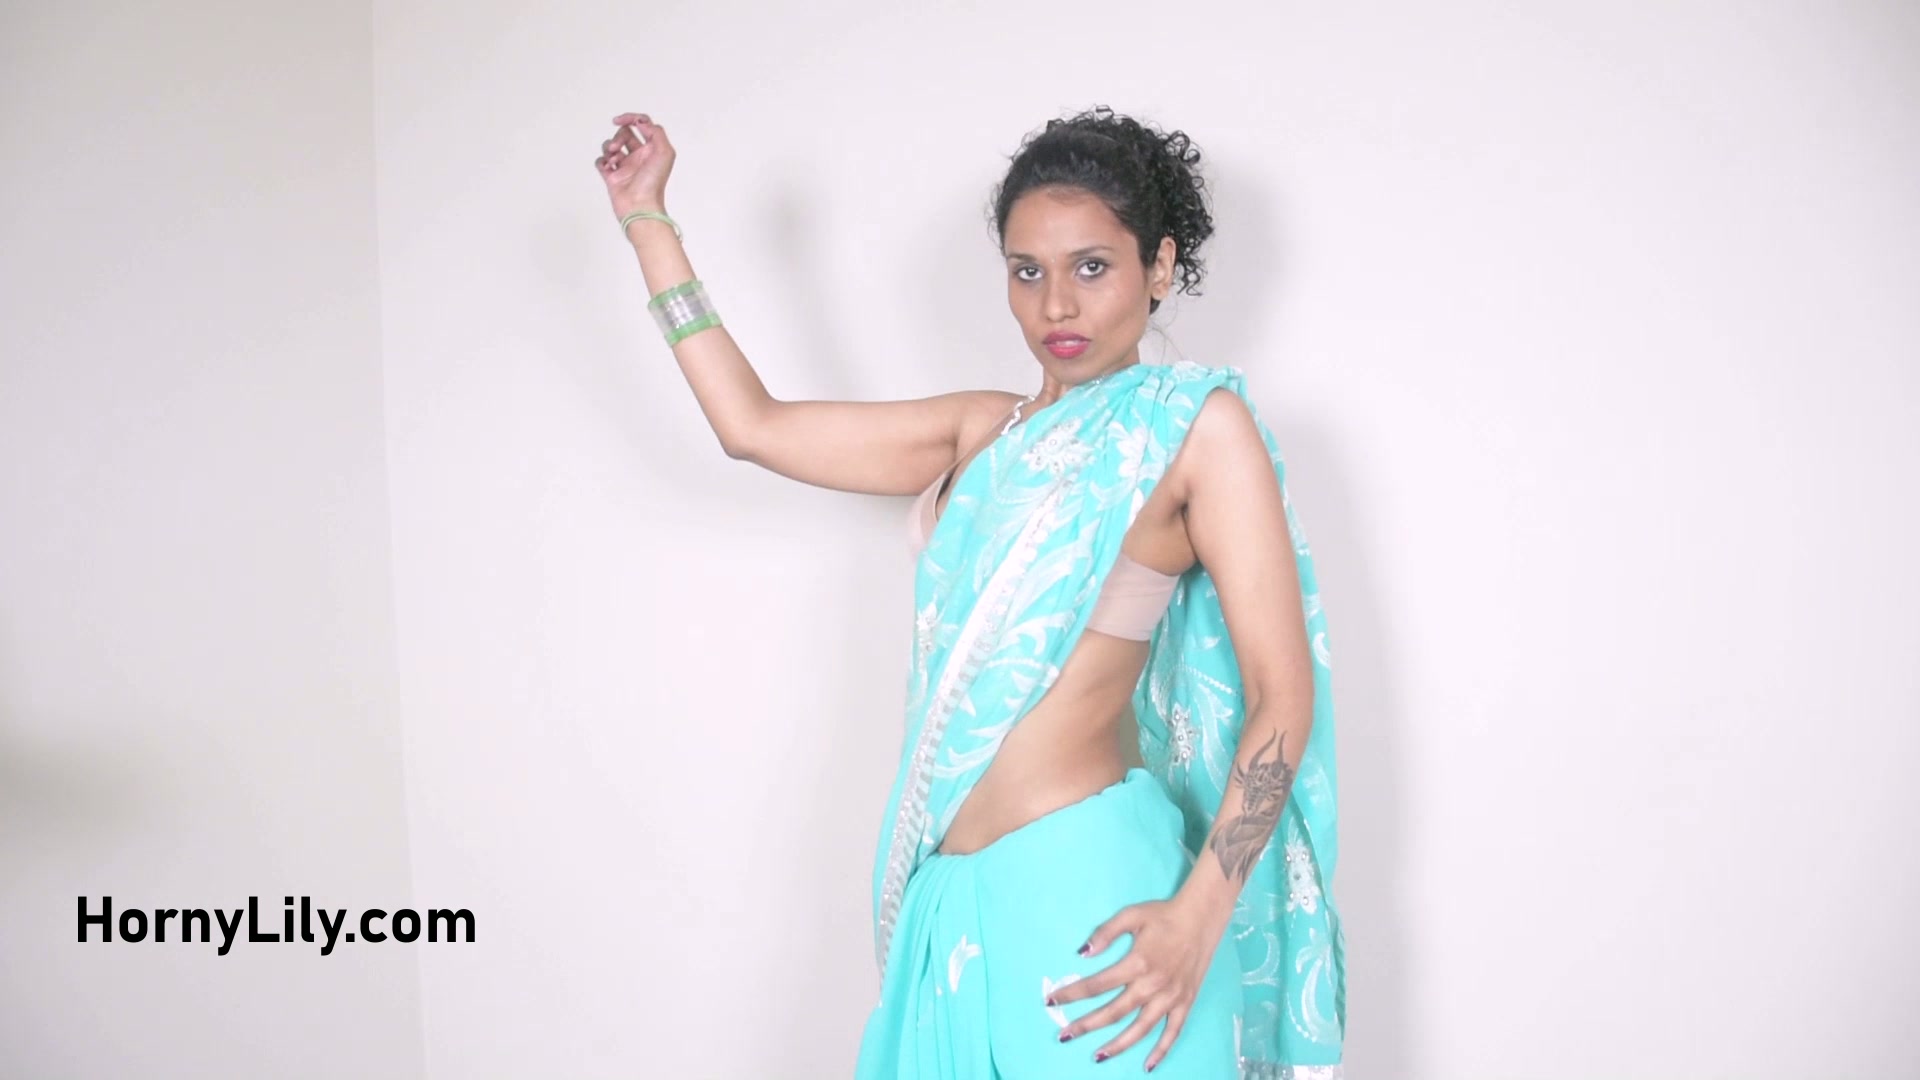 Horny Indian Housewife In Sari Dancing To Strip Naked In This Hd Homemade Porn/ image